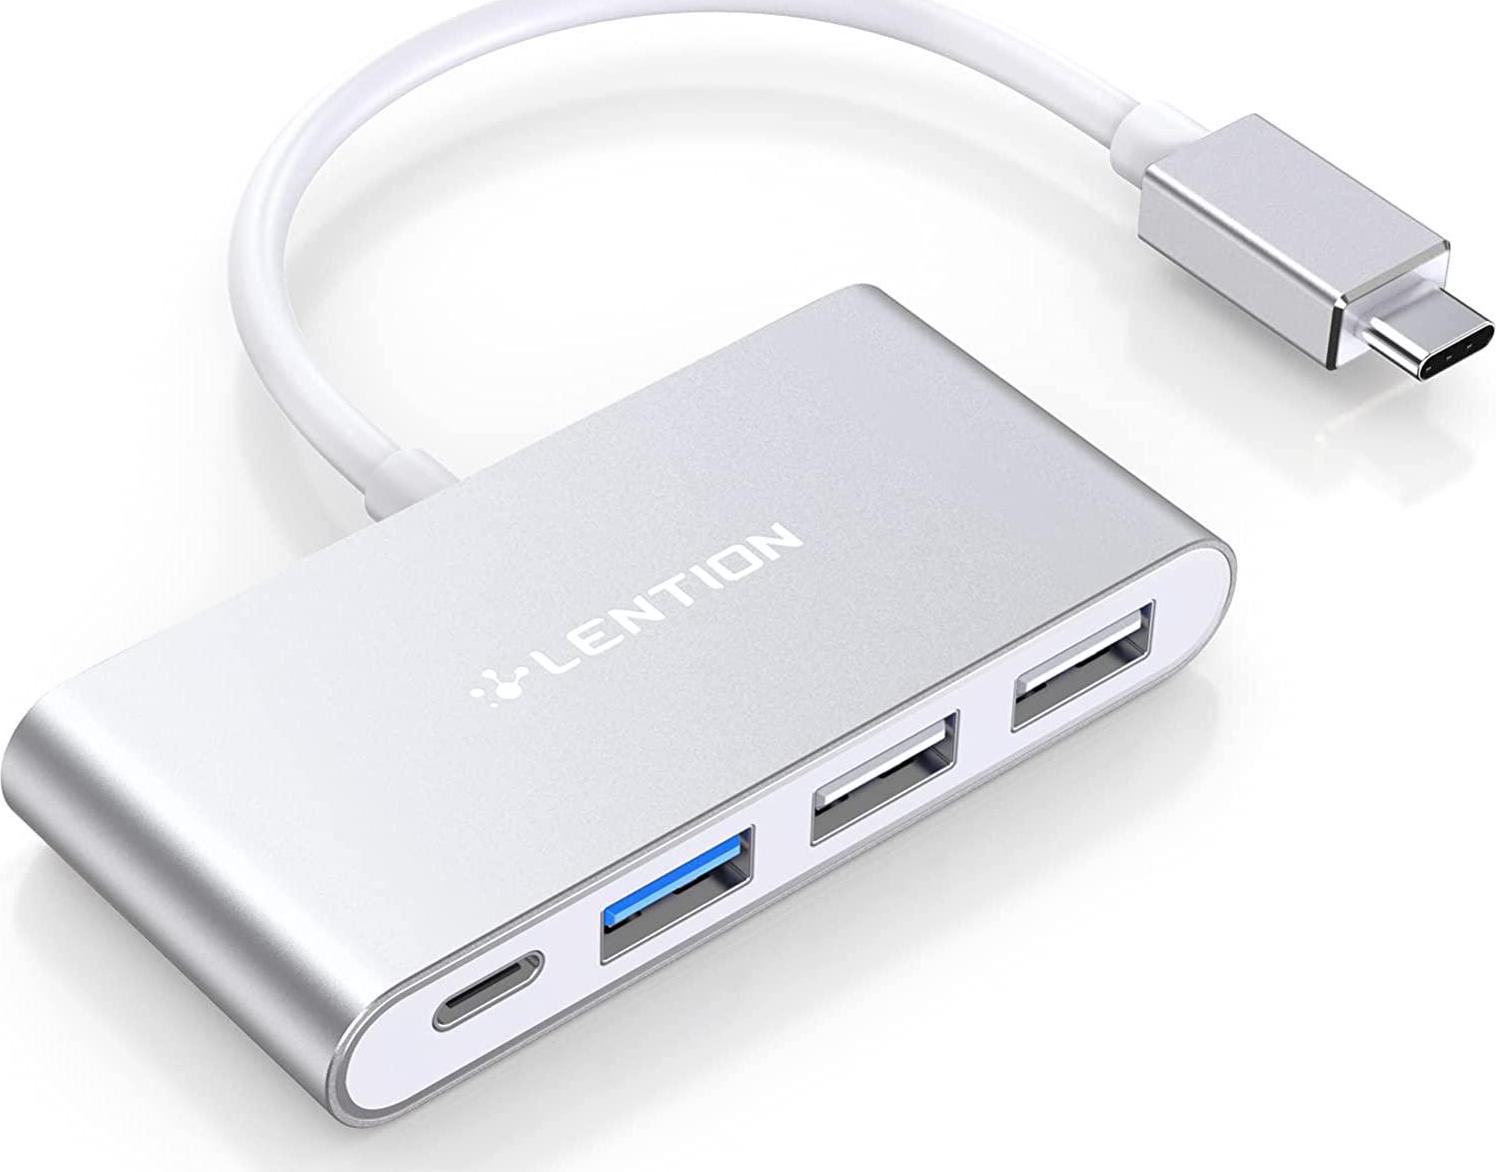 LENTION, LENTION 4-in-1 USB-C Hub with Type C, USB 3.0, USB 2.0 Compatible 2022-2016 MacBook Pro 13/15/16, New Mac Air/Surface, ChromeBook, More, Multiport Charging and Connecting Adapter (CB-C13, Silver)